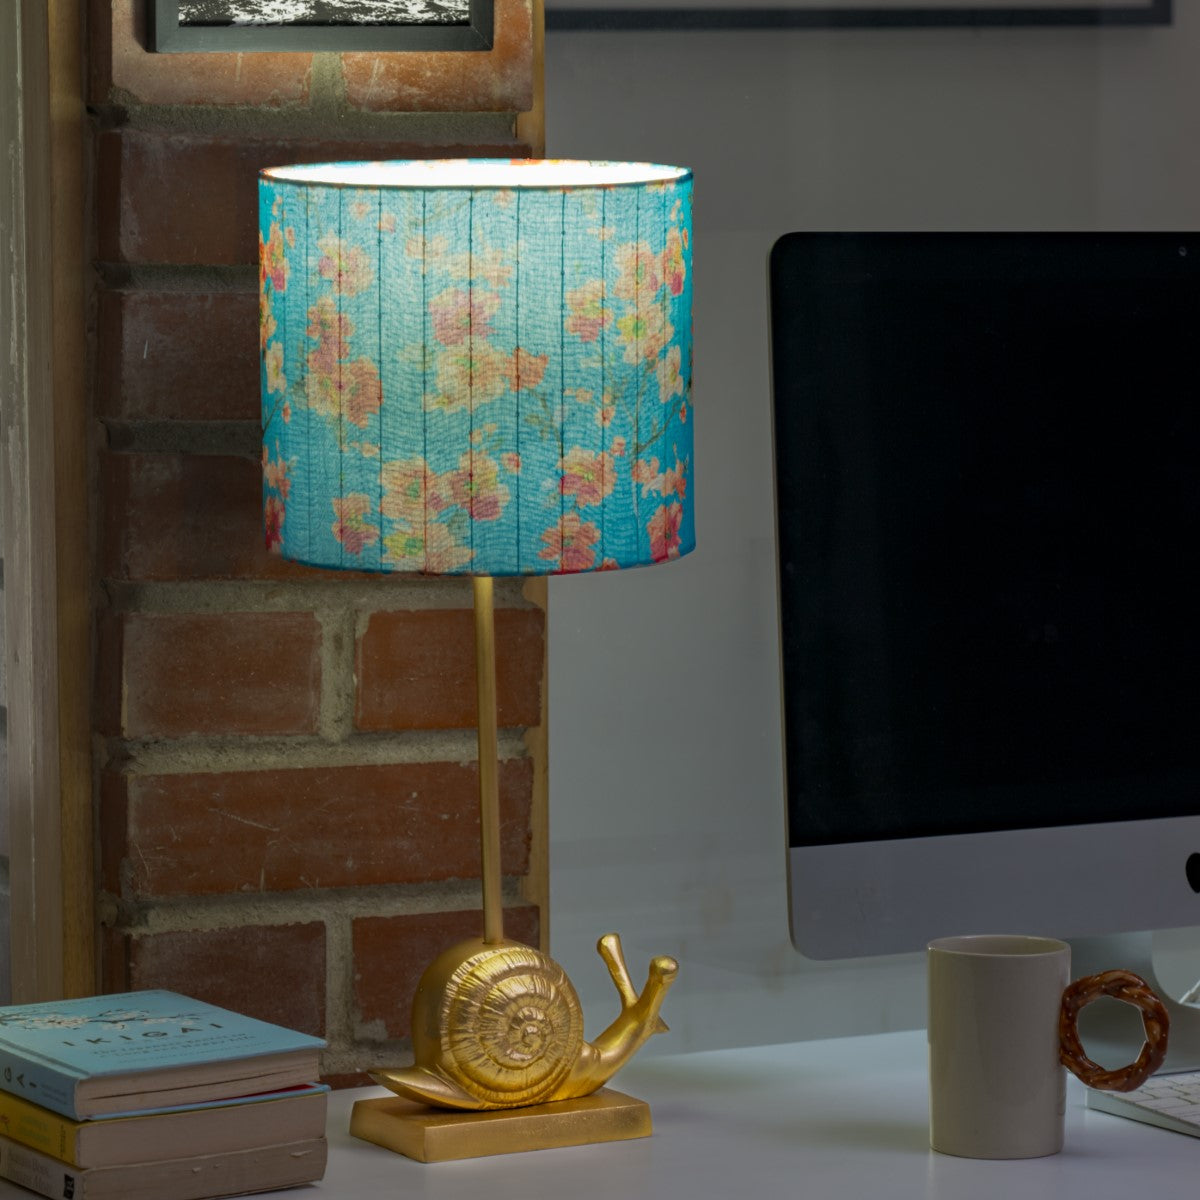 The Snail Lamp with Floral Cyan Shade